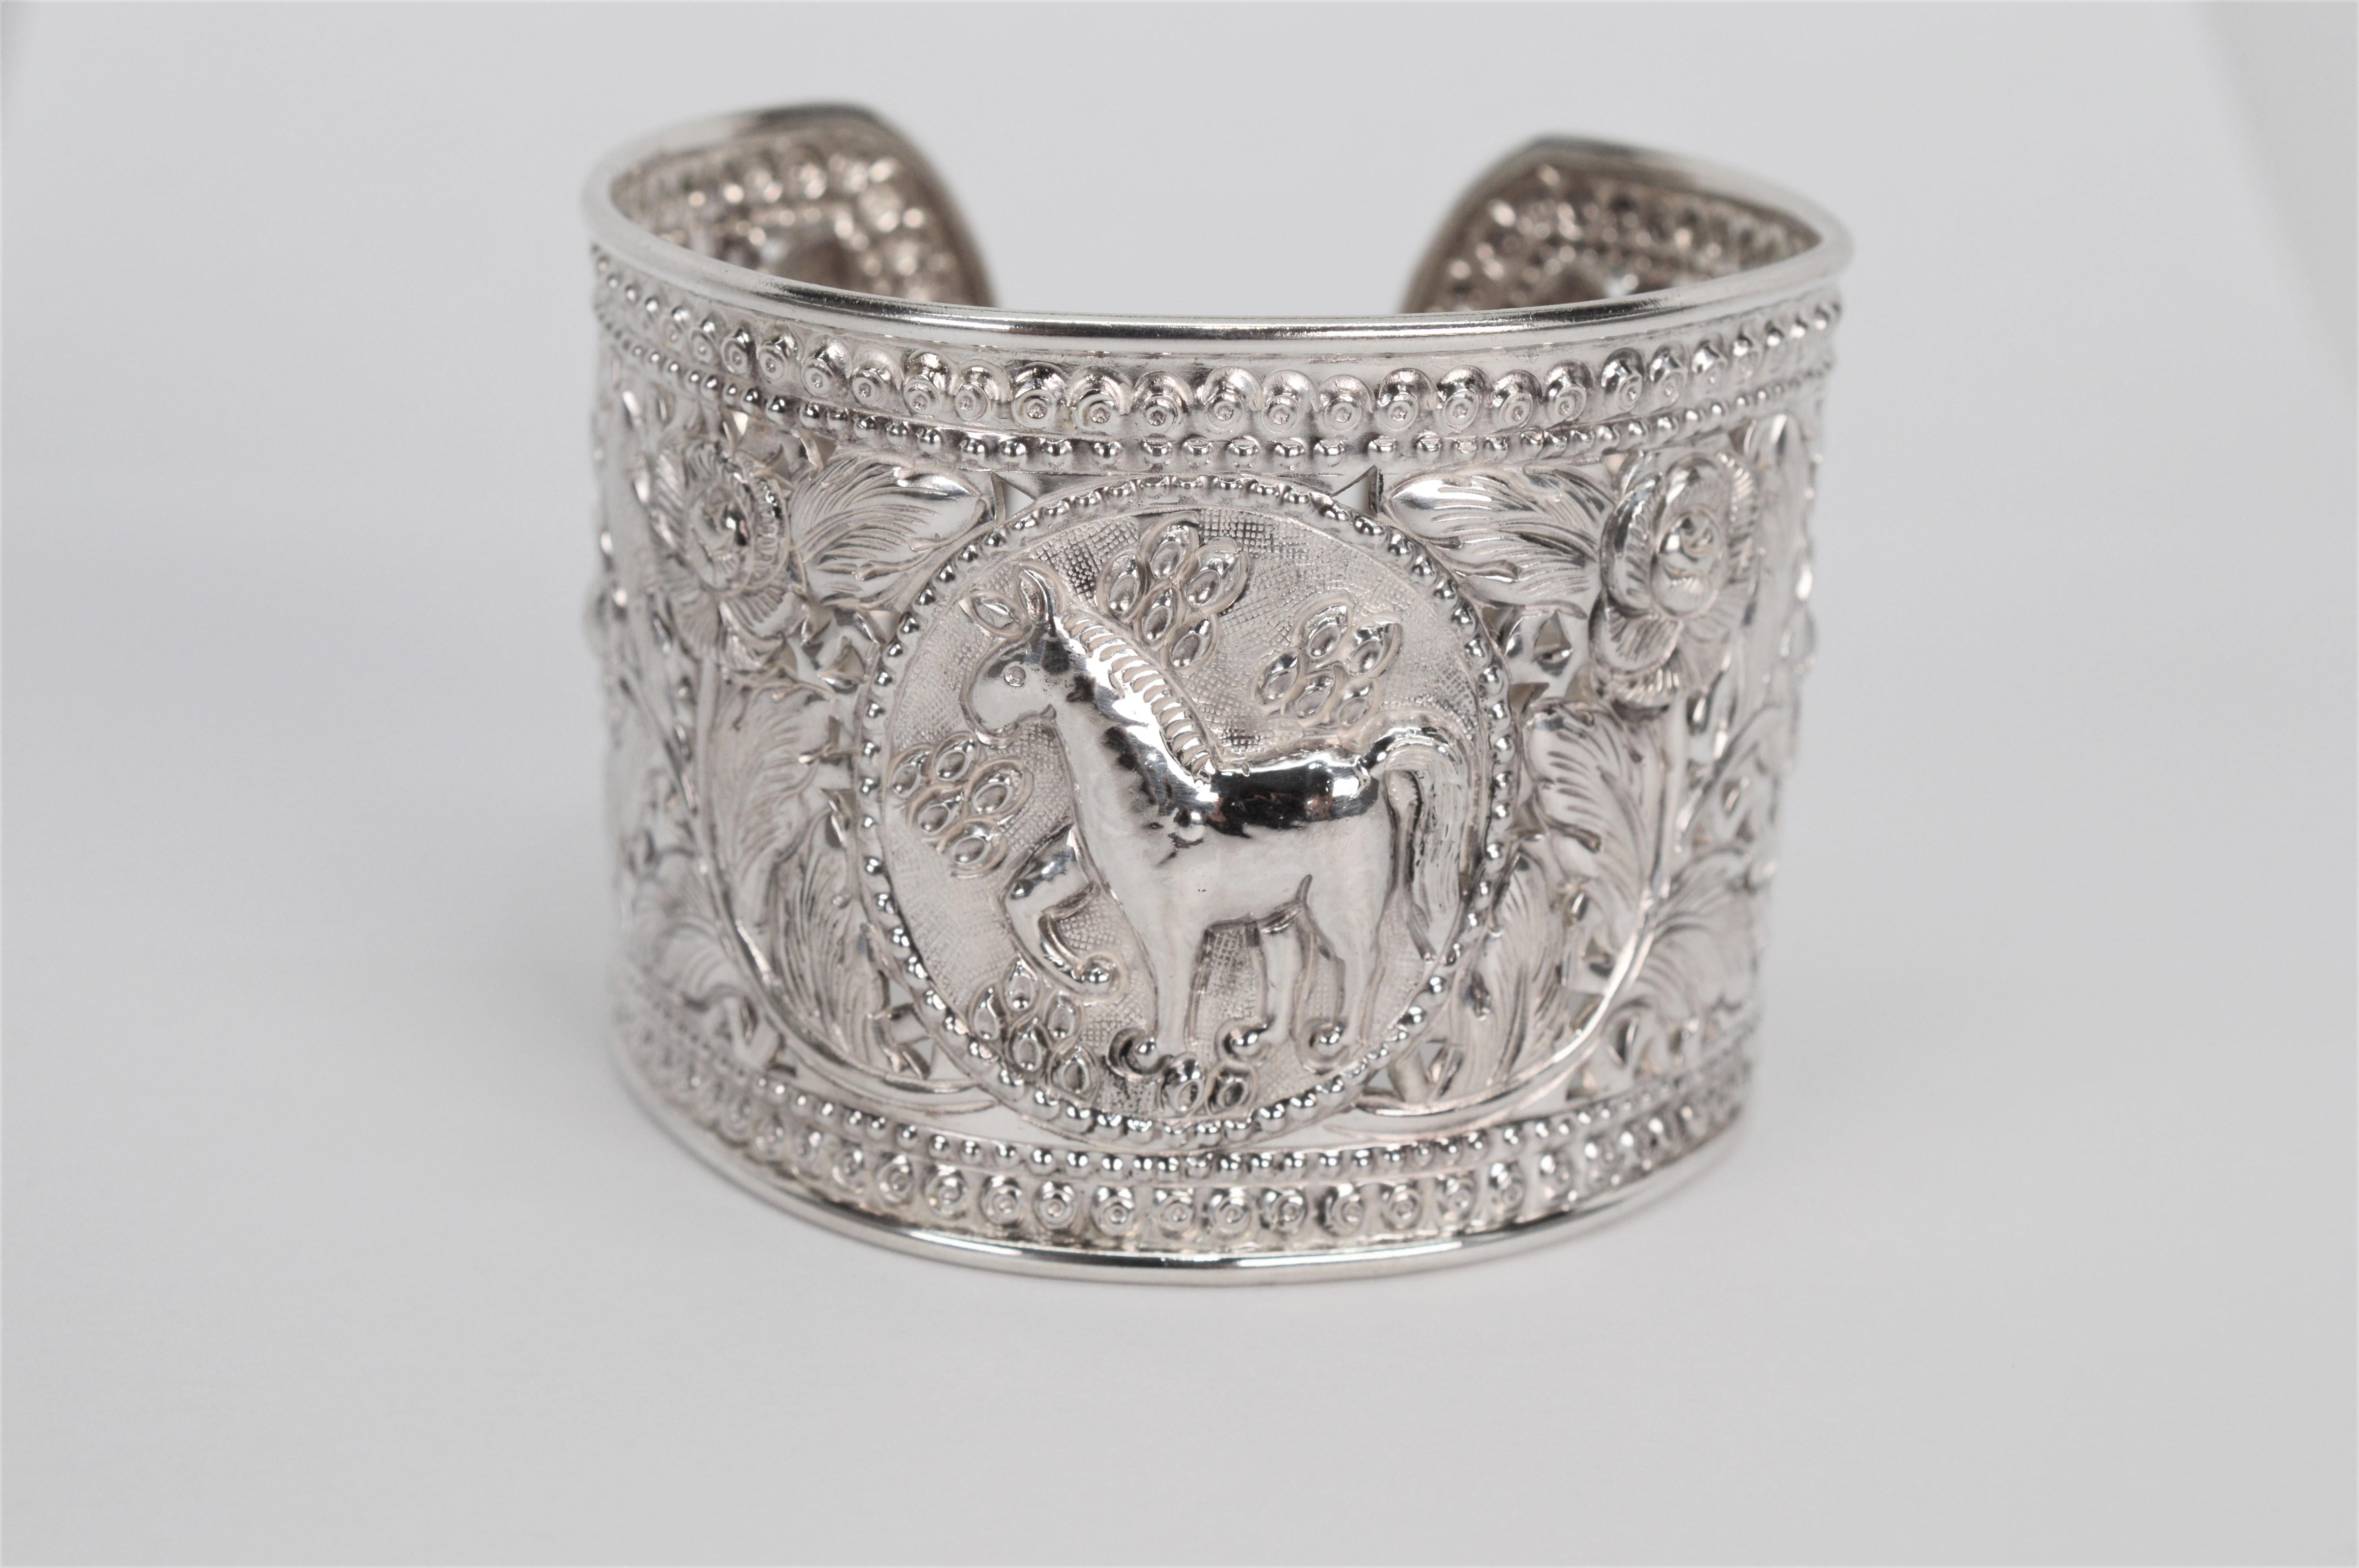 English rose trails the featured stallion on this die struck .925 sterling silver equestrian themed wide cuff bracelet. The impressive detail and generous two inch width make this vintage cuff an eclectic piece that will surely be noticed. Rolled